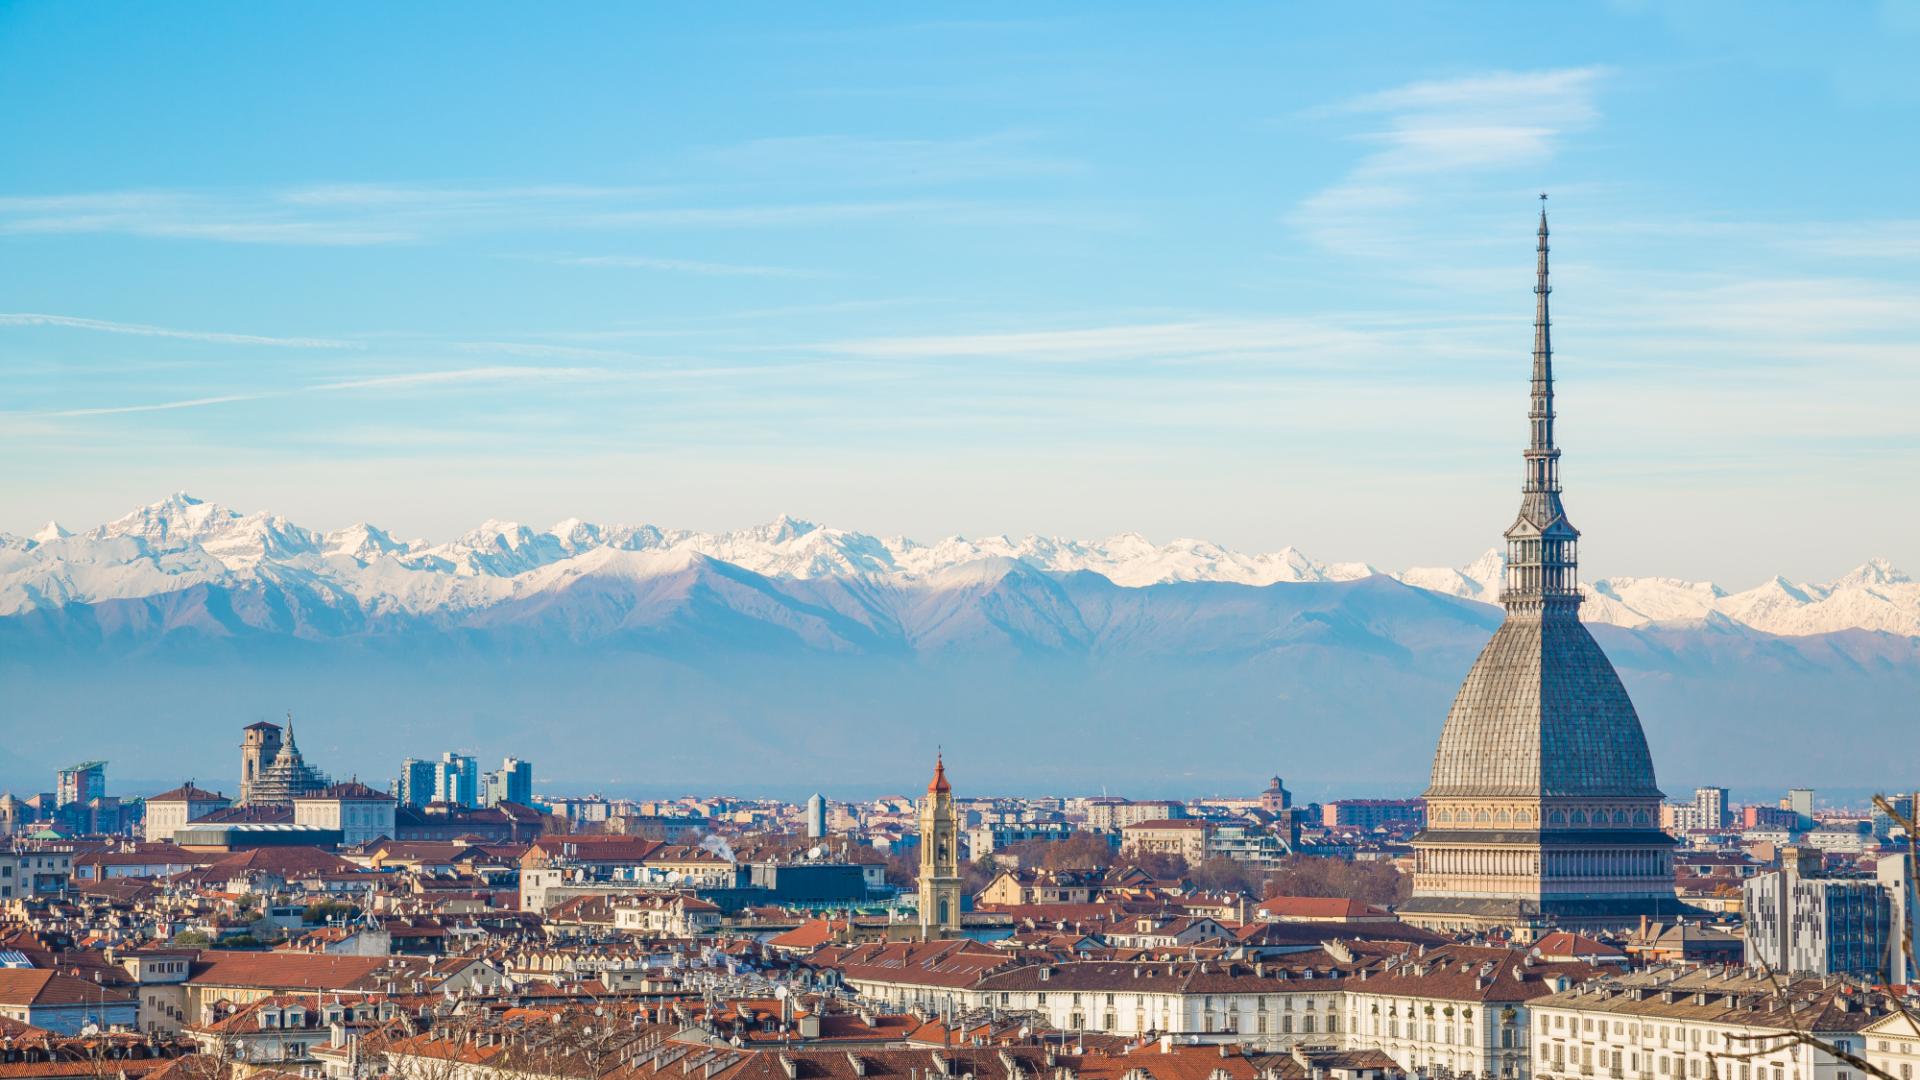 Ten things to see in Turin in one day